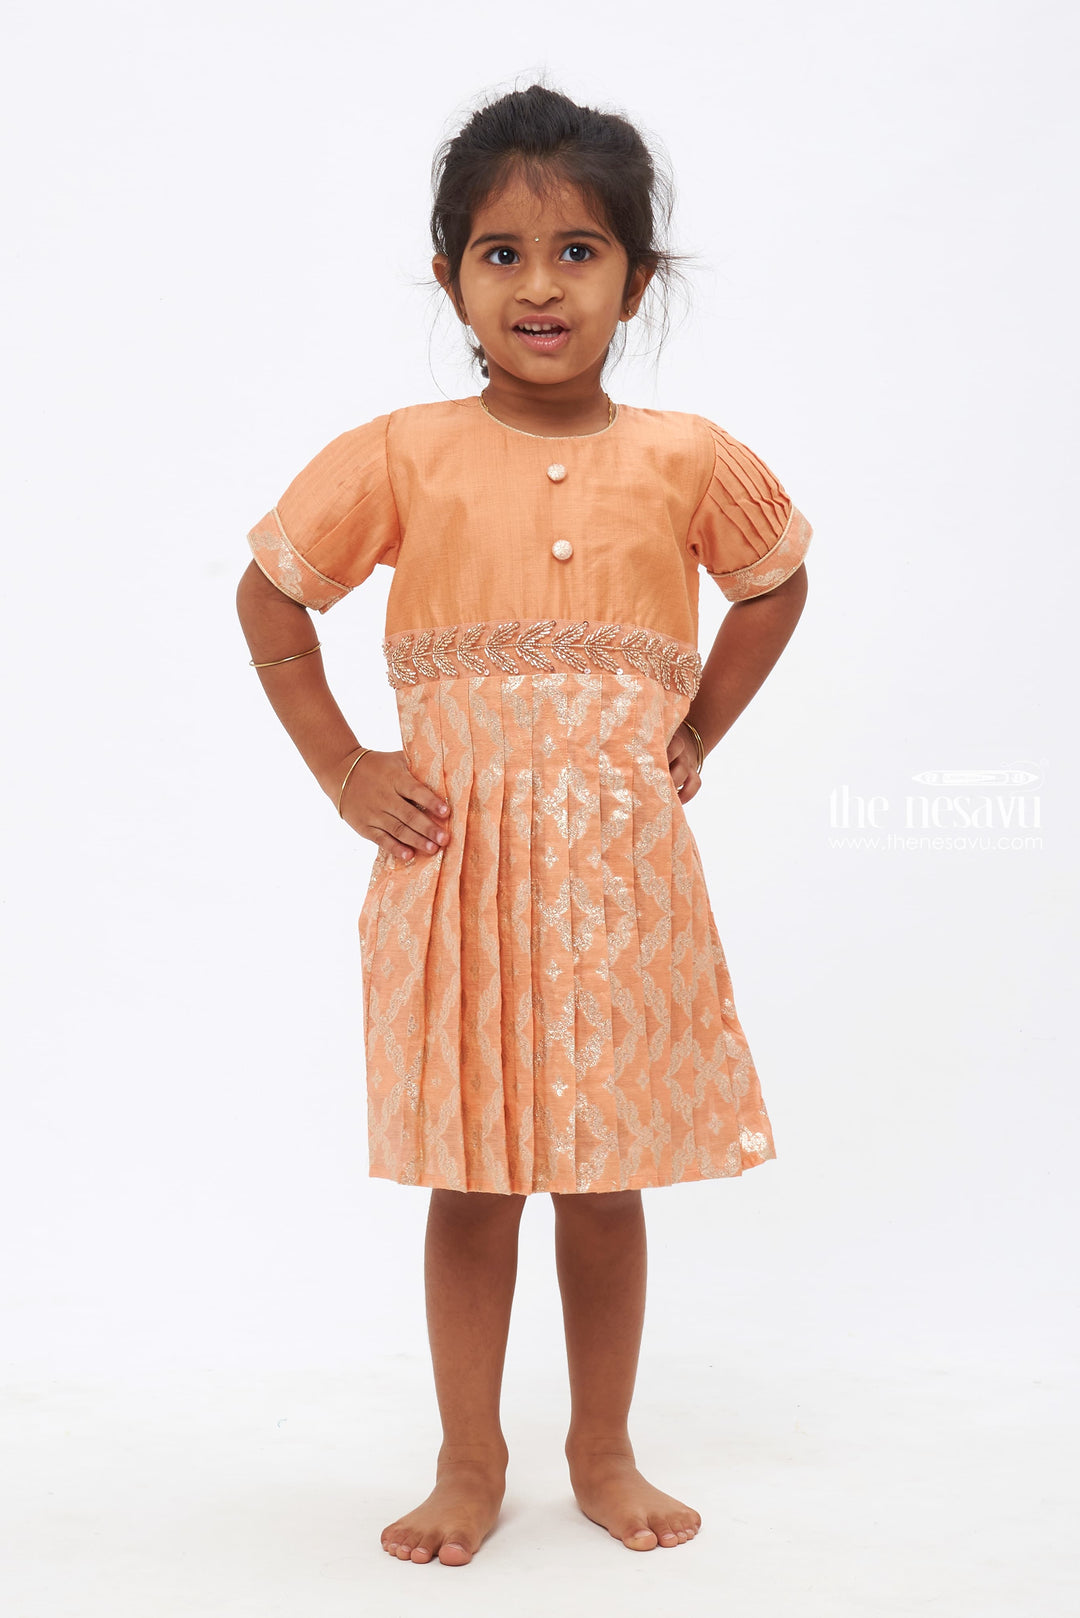 The Nesavu Silk Frock Salmon Colored Zari Embroidered Silk Frock with Pleated Sleeves Nesavu 16 (1Y) / Salmon / Chanderi SF717B-16 Vintage Designer Silk Frock for Children | Luxury Party Outfit | The Nesavu